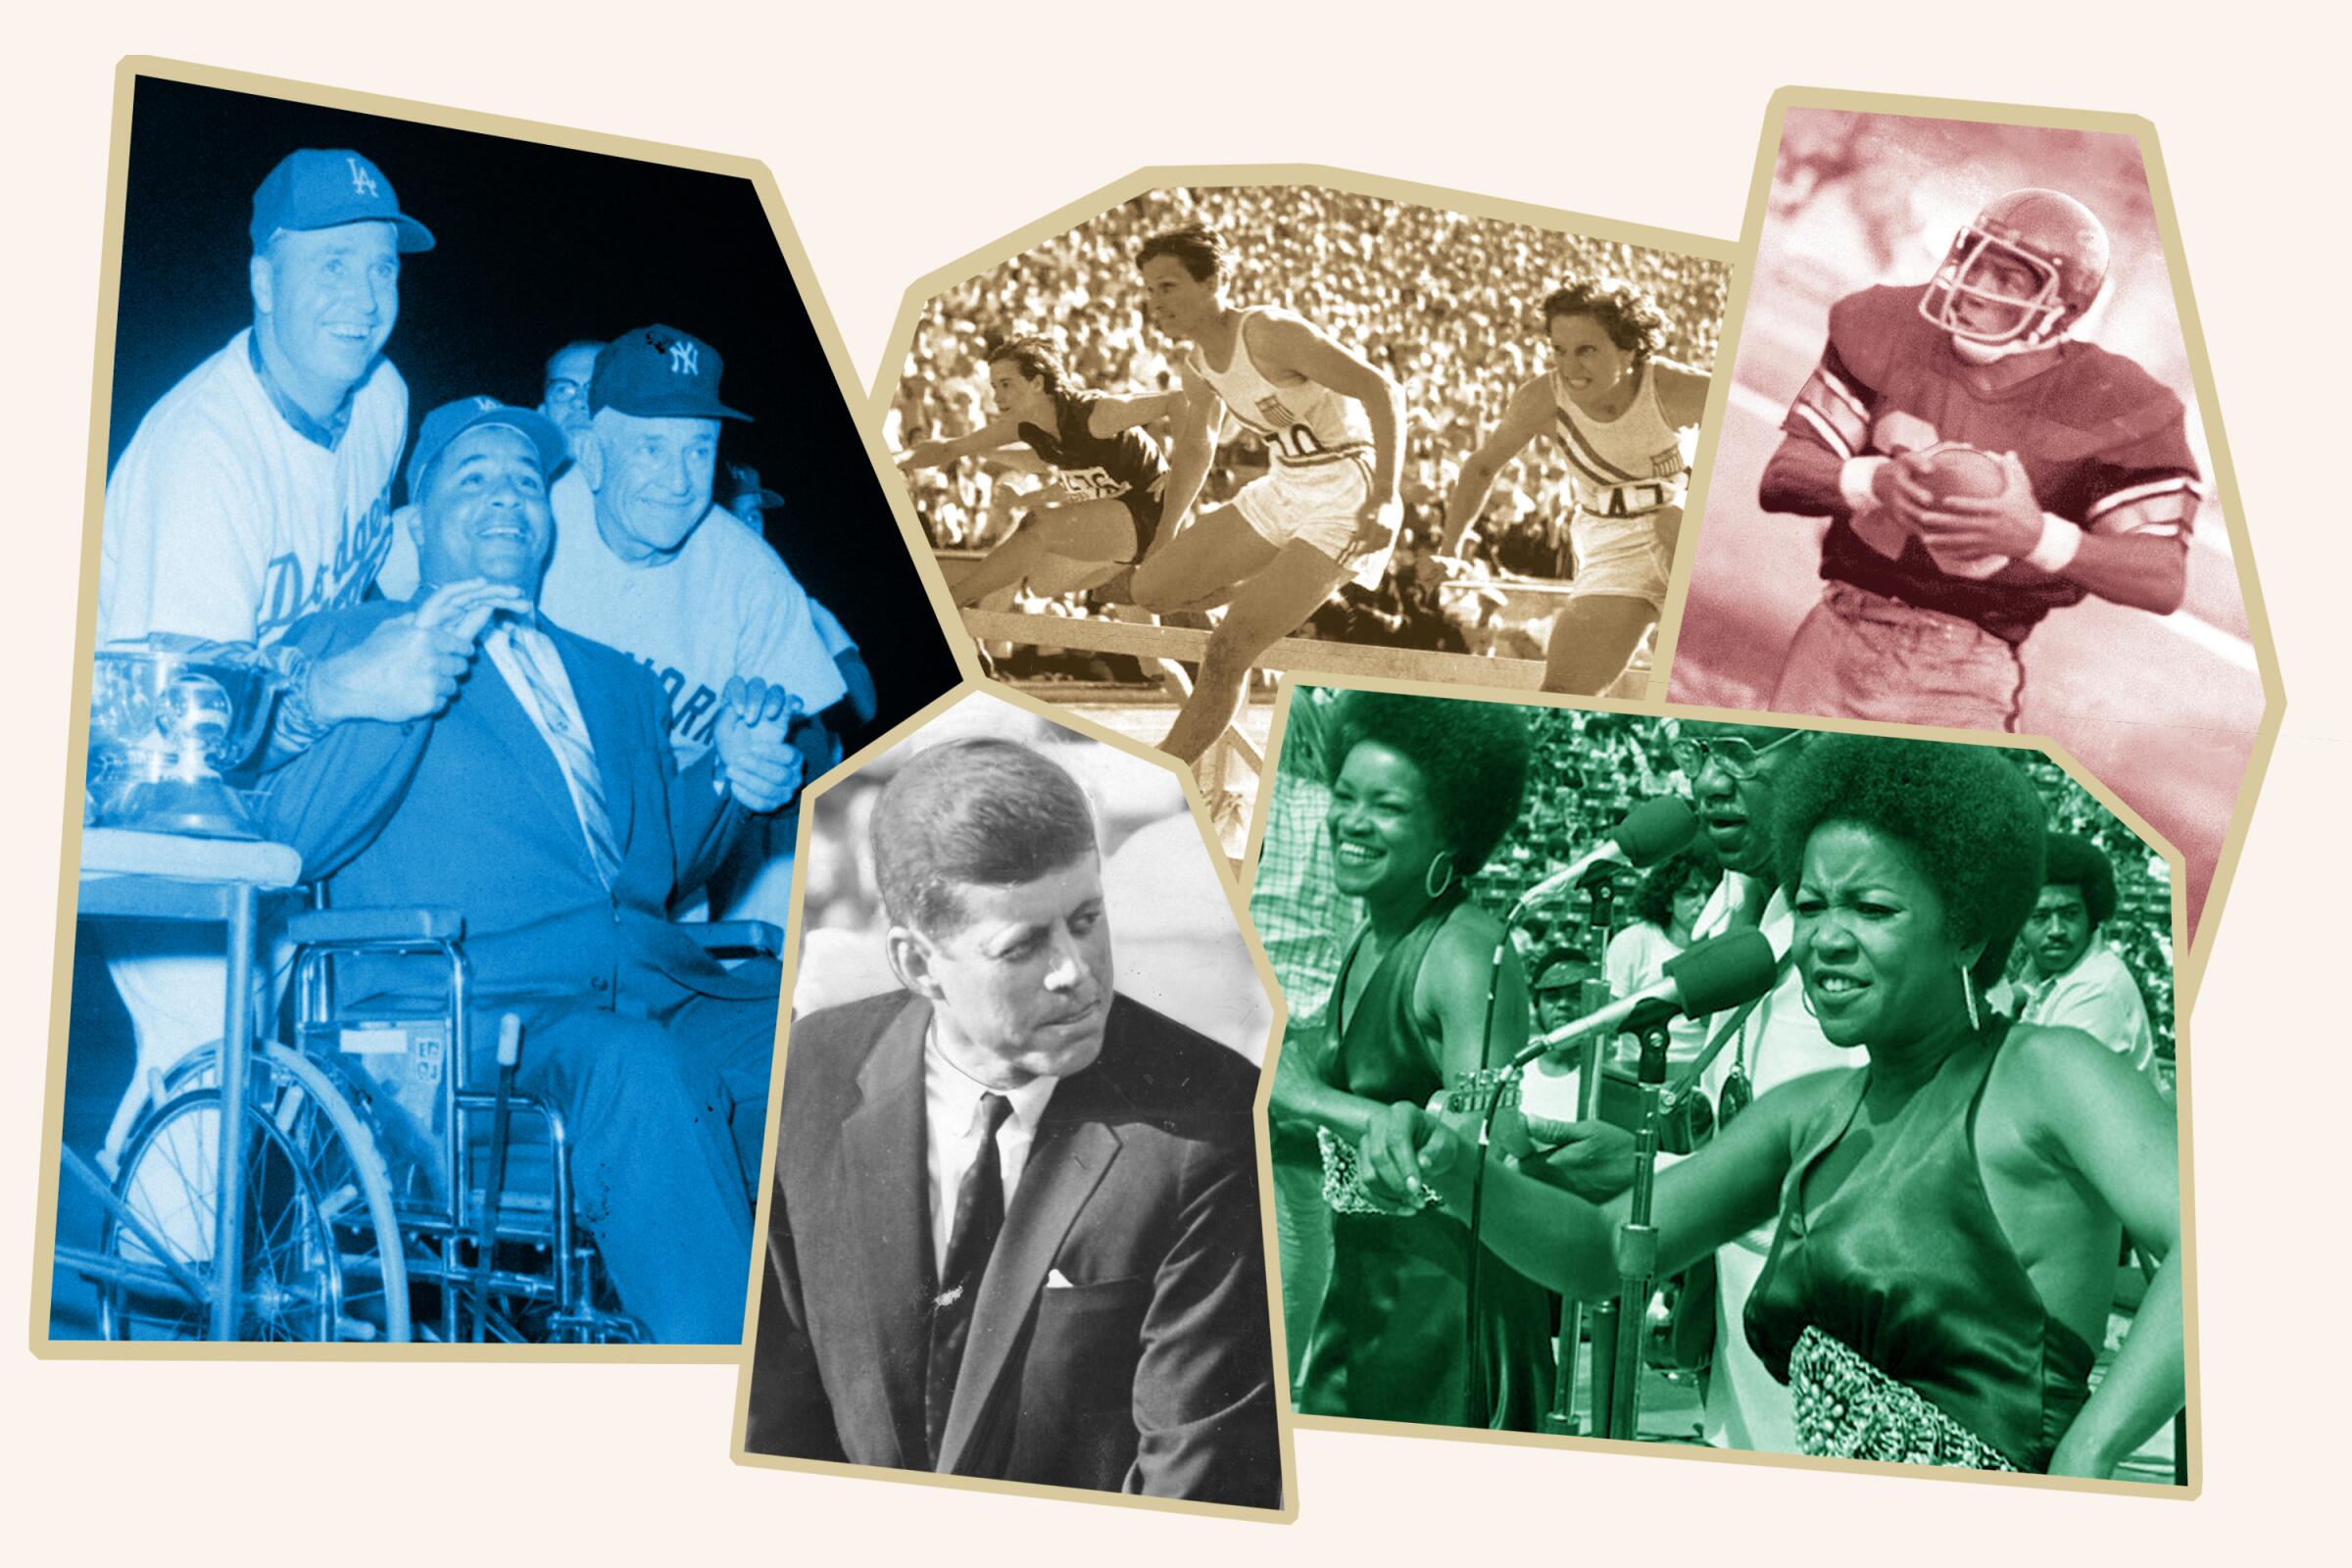 Clockwise from left: Roy Campanella, Babe Didrikson; USC tailback Anthony Davis; the Staples Singers; John F. Kennedy 